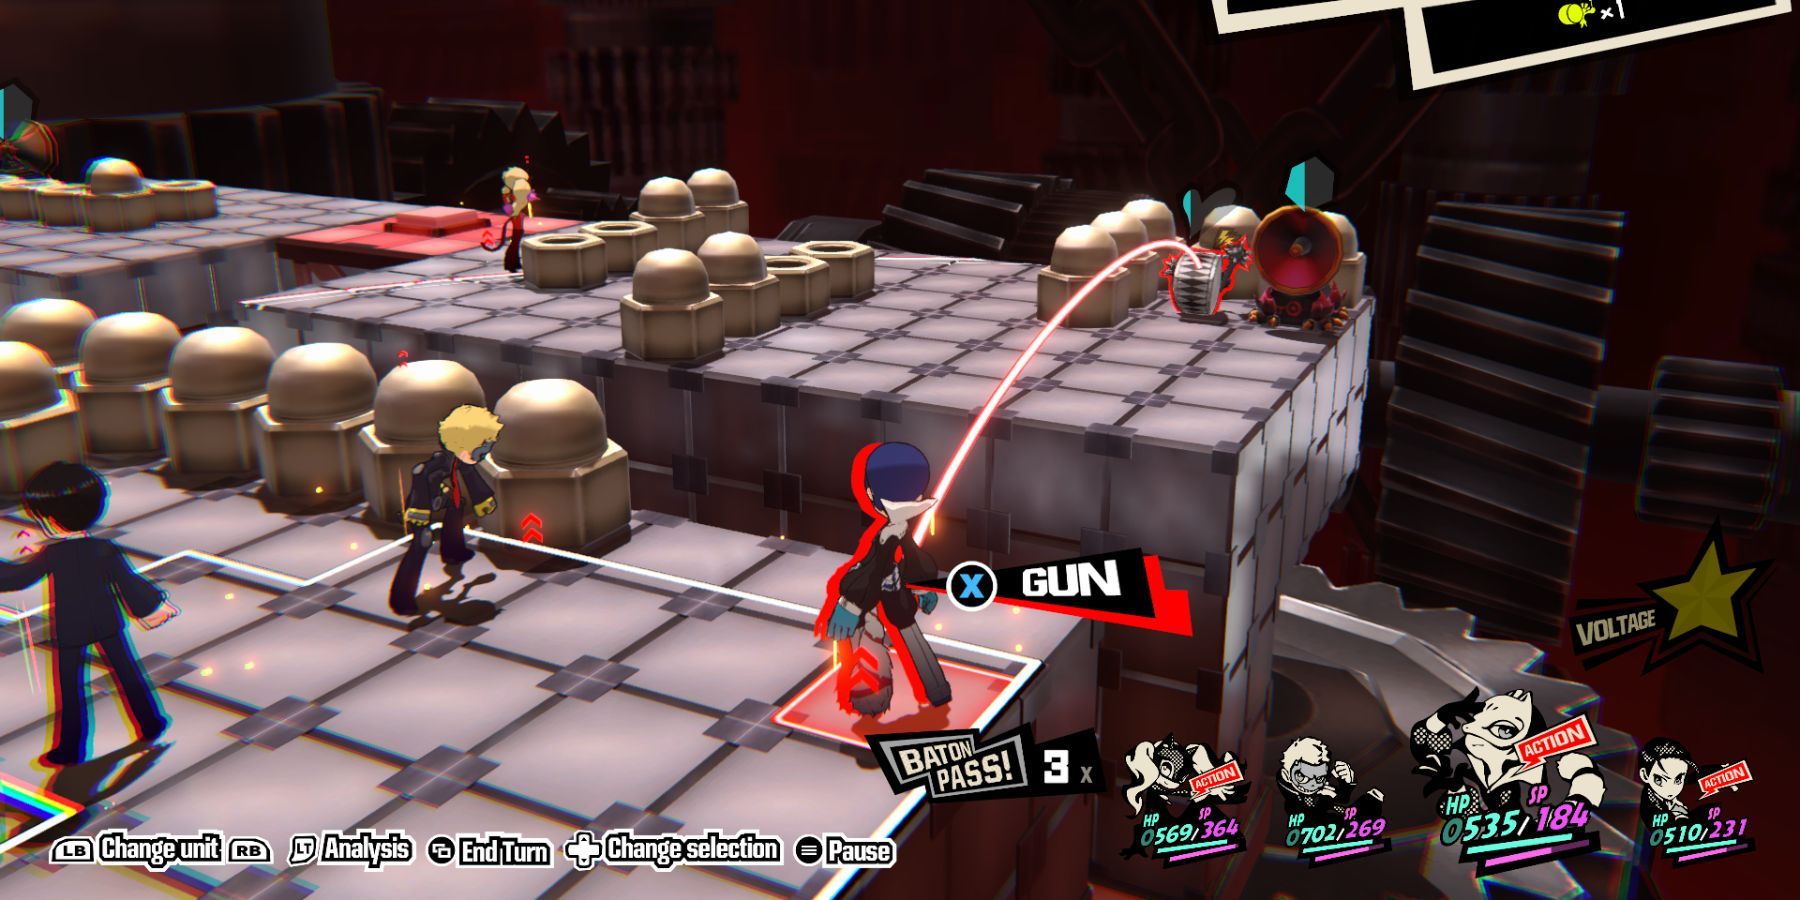 Ann, Ryuji, and Yusuke about to attack an enemy